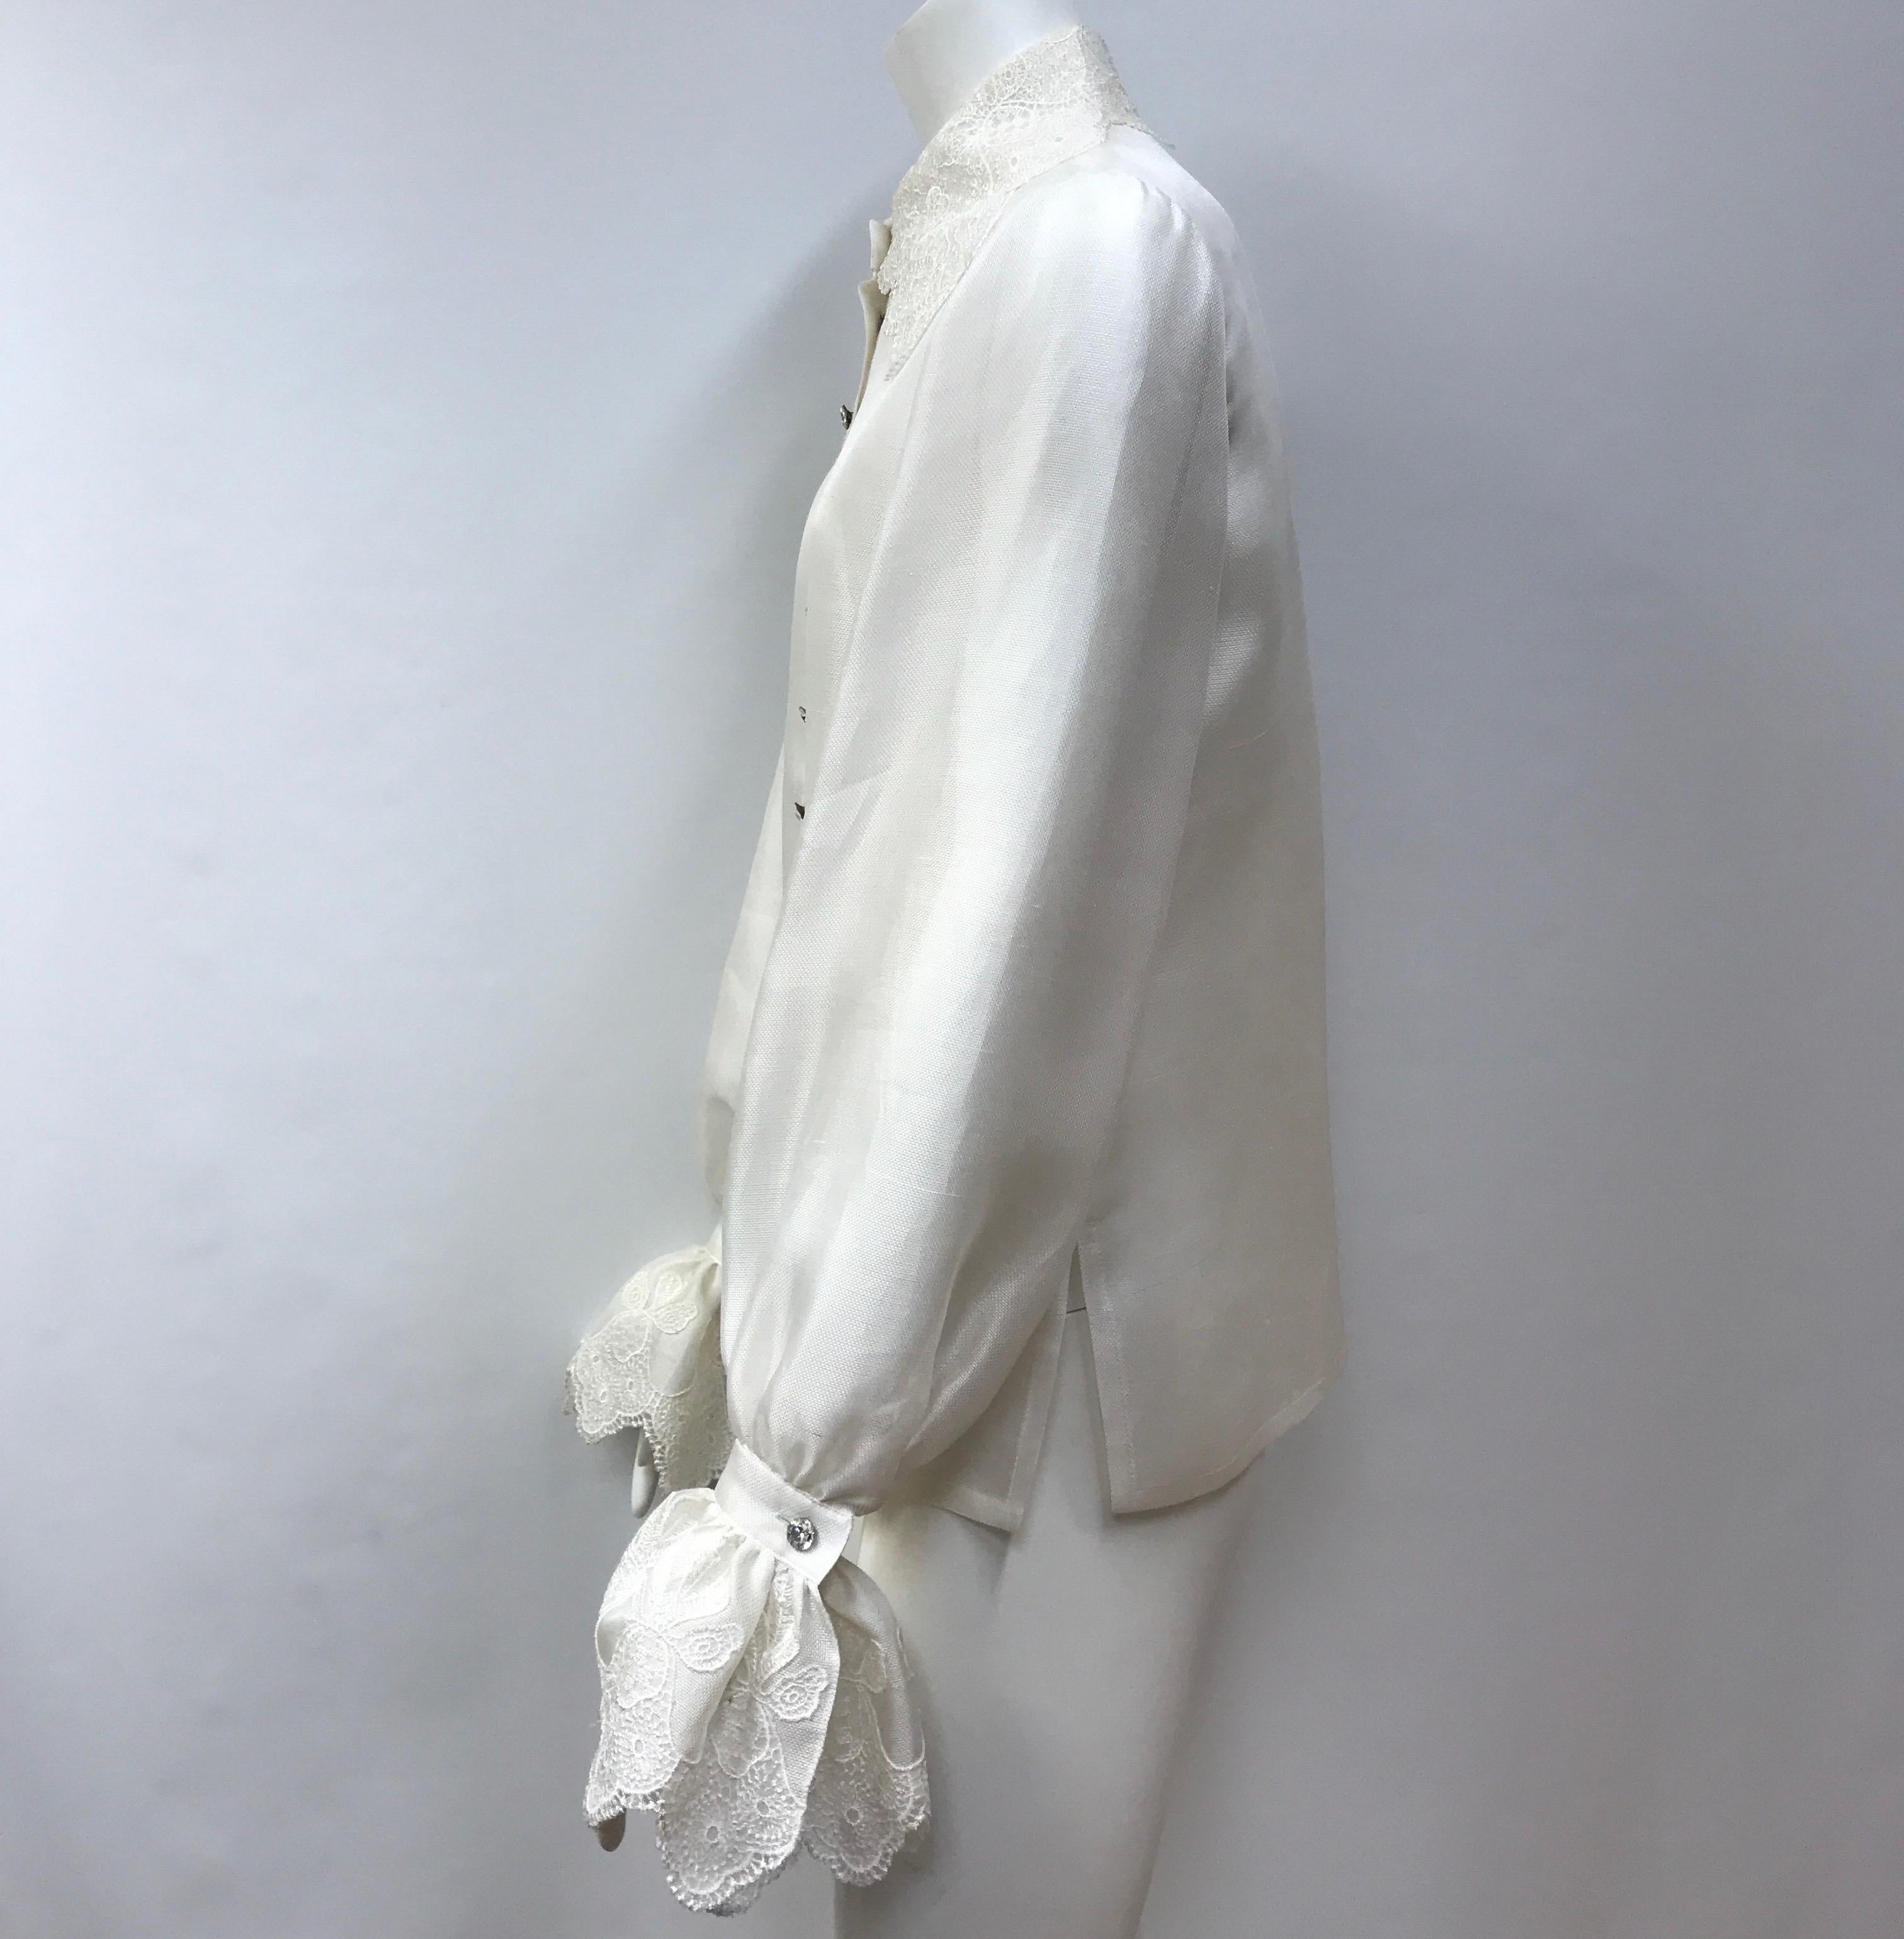 Jacques Fath Ivory Silk Organza Top-6. This stunning Jacques Fath top is in excellent condition, it shows minimal sign of use. It is made of ivory silk organza throughout and has lace around the collar and cuffs of the top. This top is long sleeved